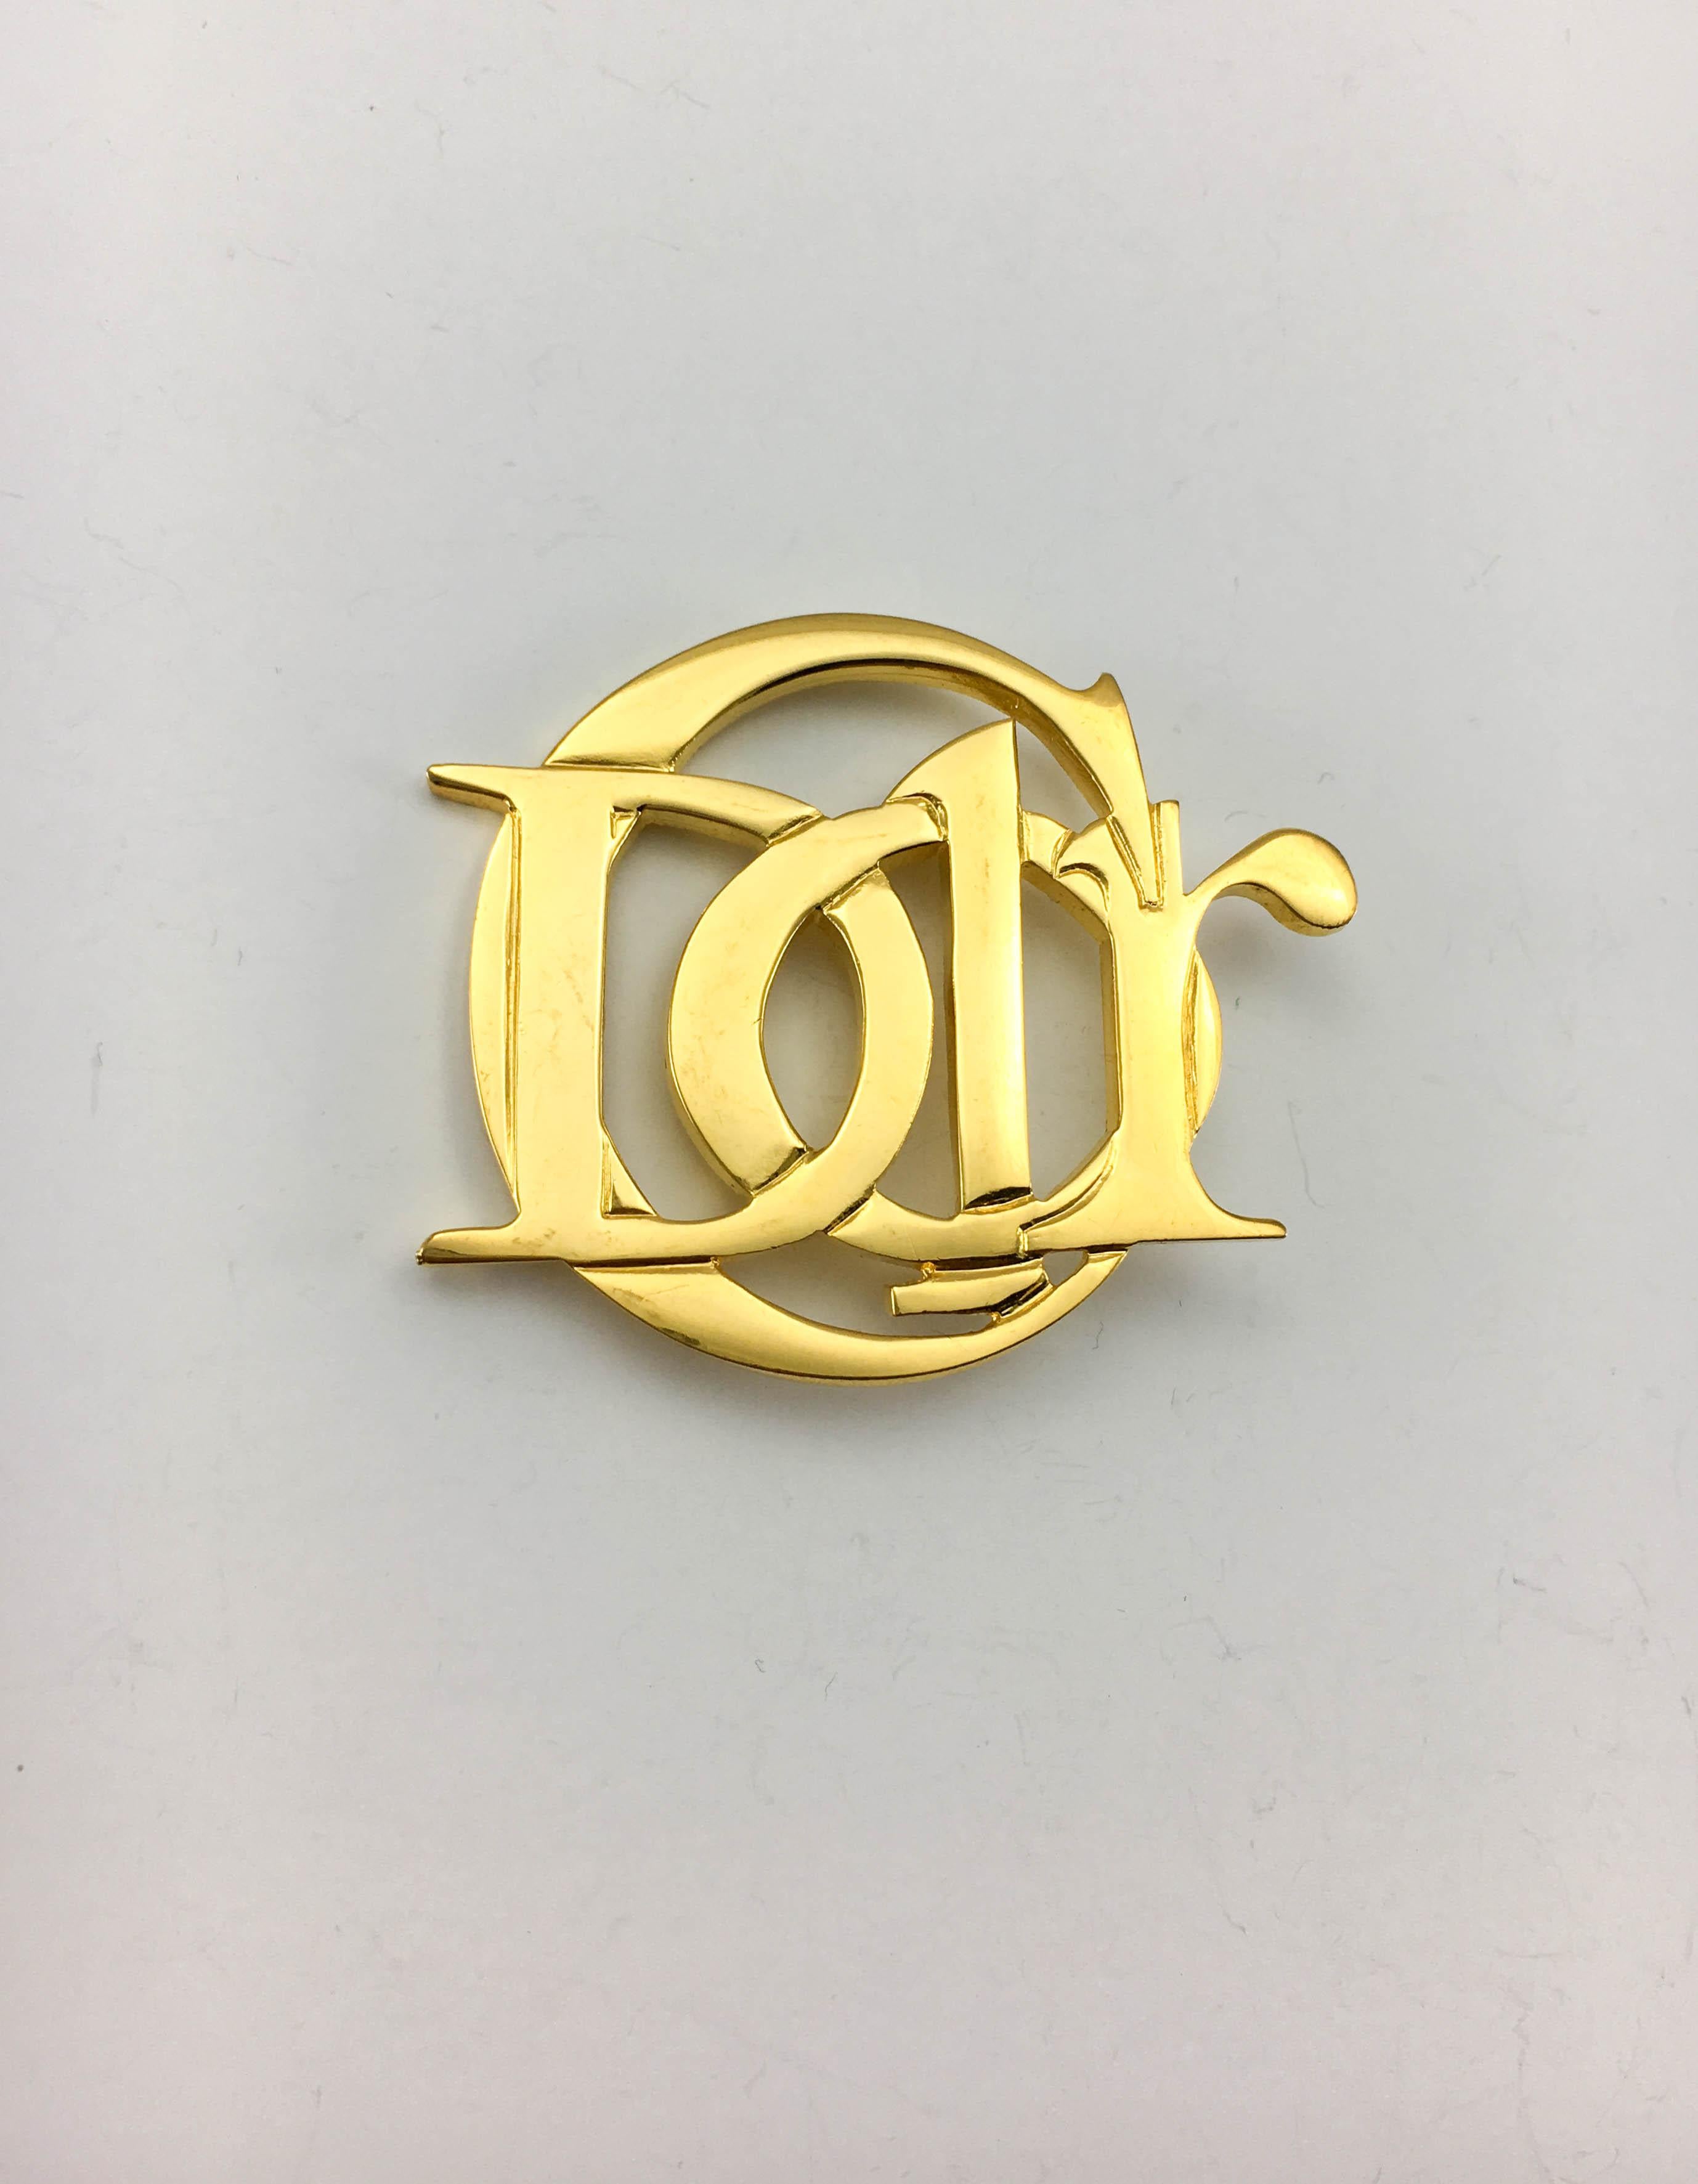 Vintage Dior Gilt Brooch. This piece by Christian Dior dates back from the 1990’s. Made in gilt metal, it shows a stylised ‘C. Dior’ design. Signed on the back. An iconic piece for a fashion statement. 

Label / Designer: Christian Dior

Period: